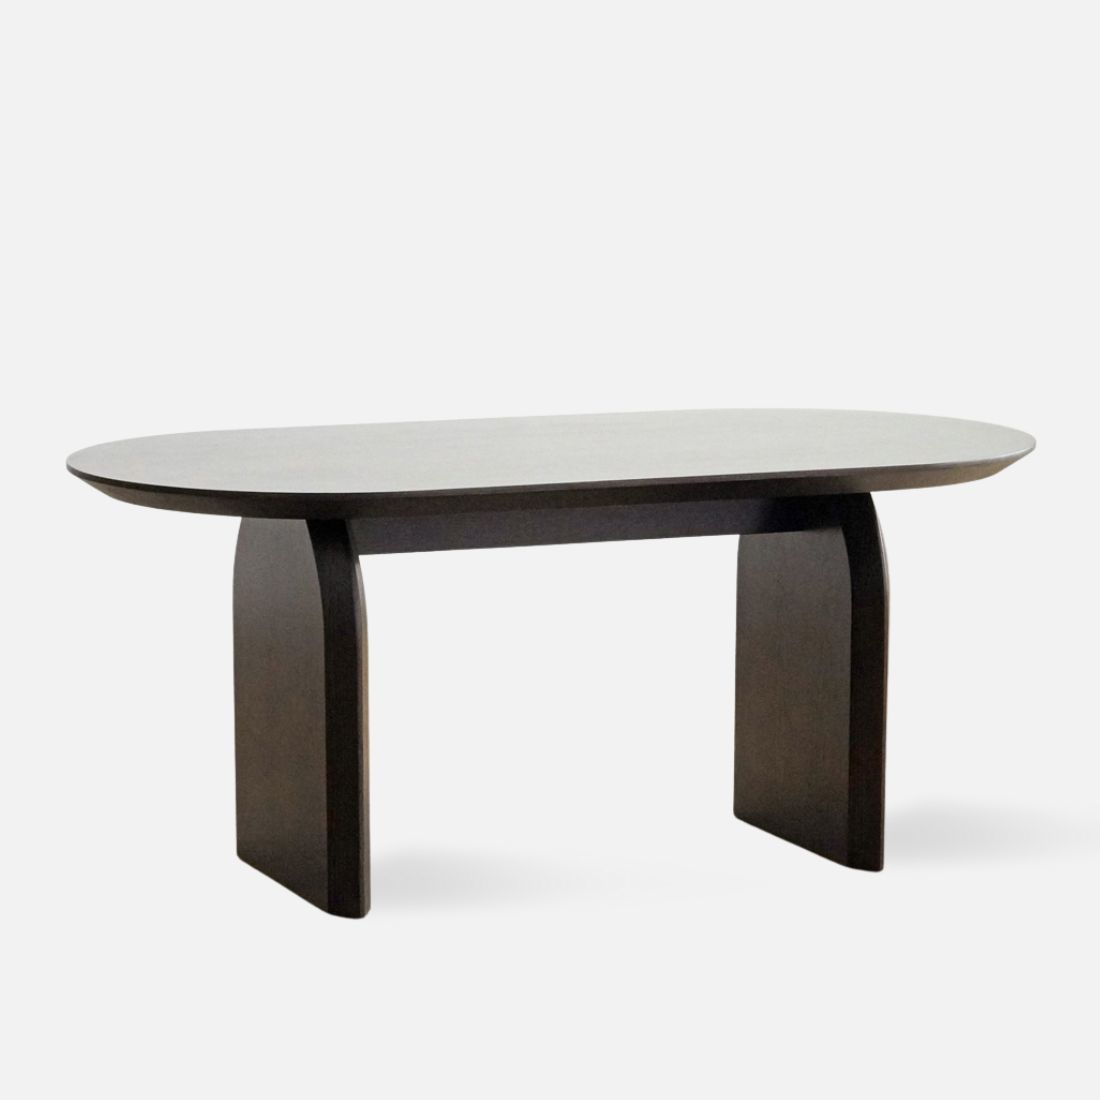 WILLOW Oval Black Ashwood Dining Table